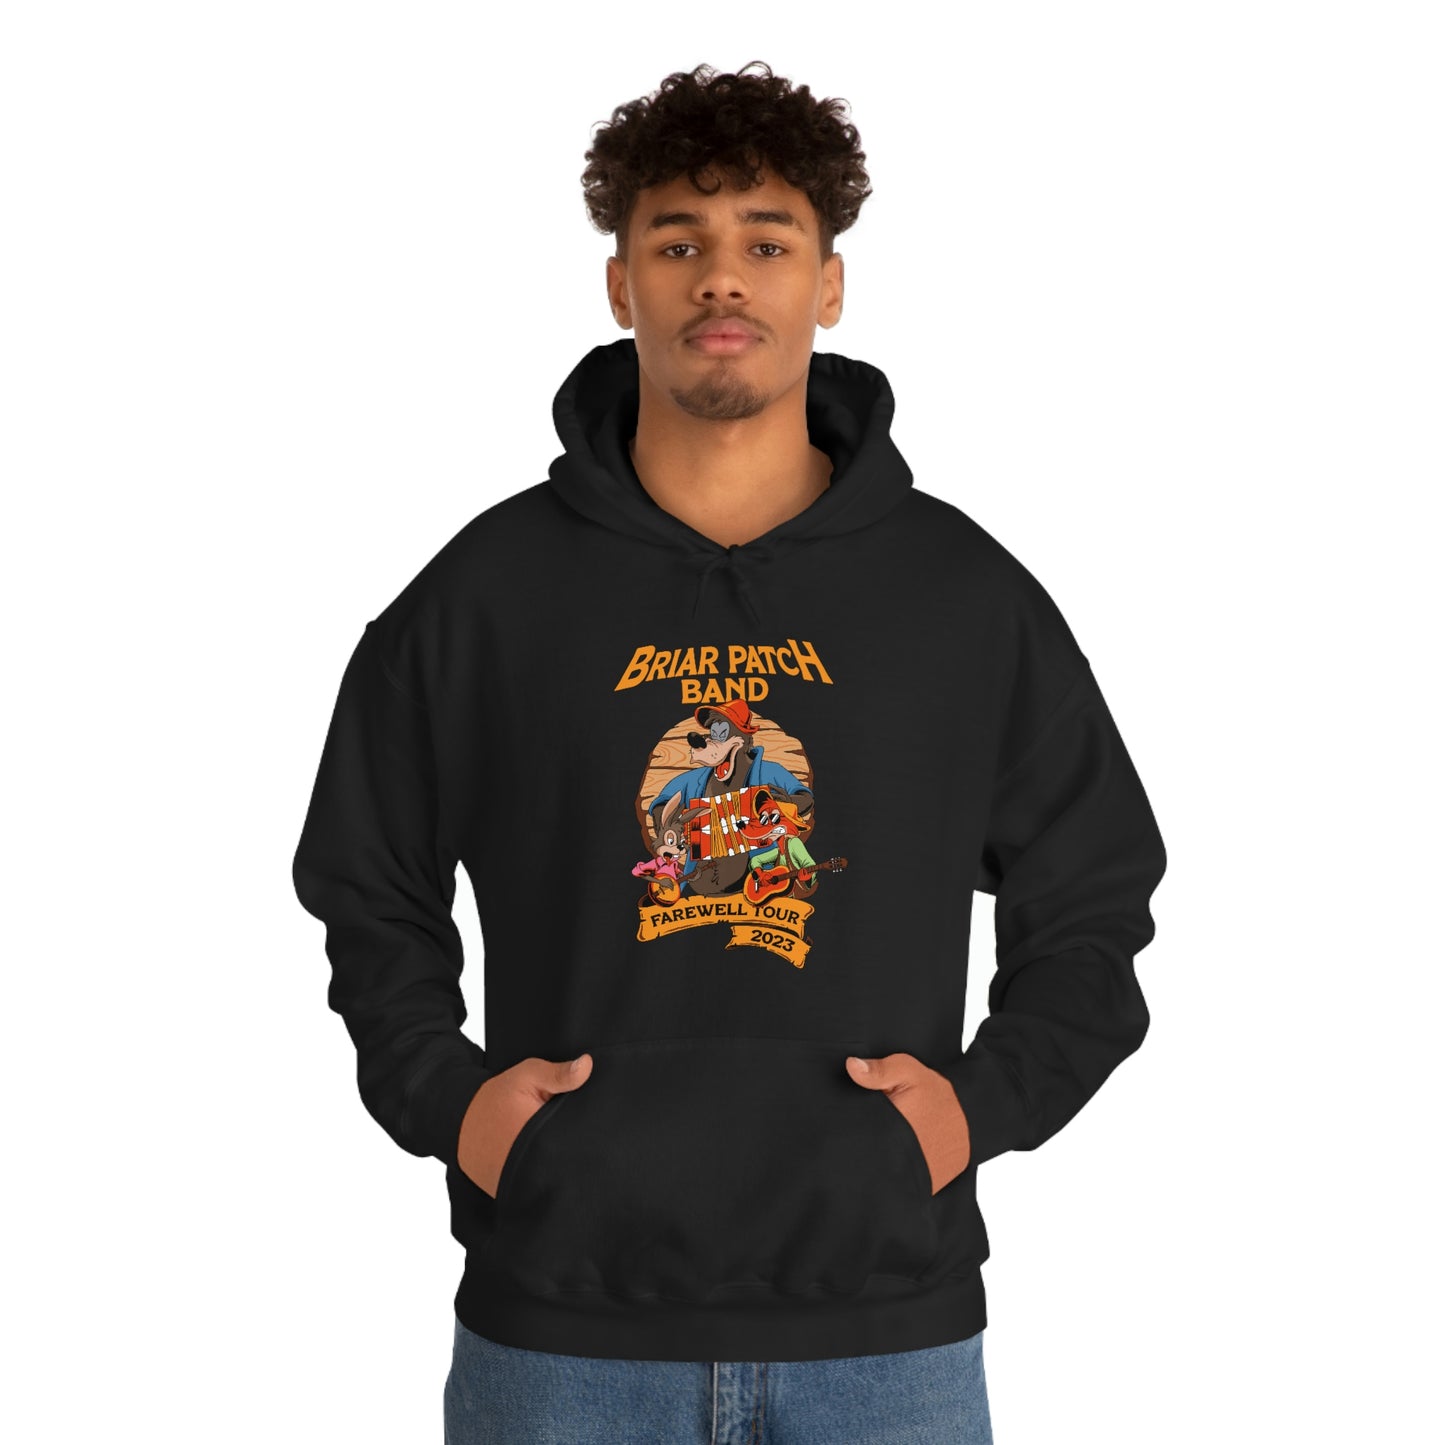 Briar Patch Band Farewell Tour - Adult Hoodie Sweatshirt